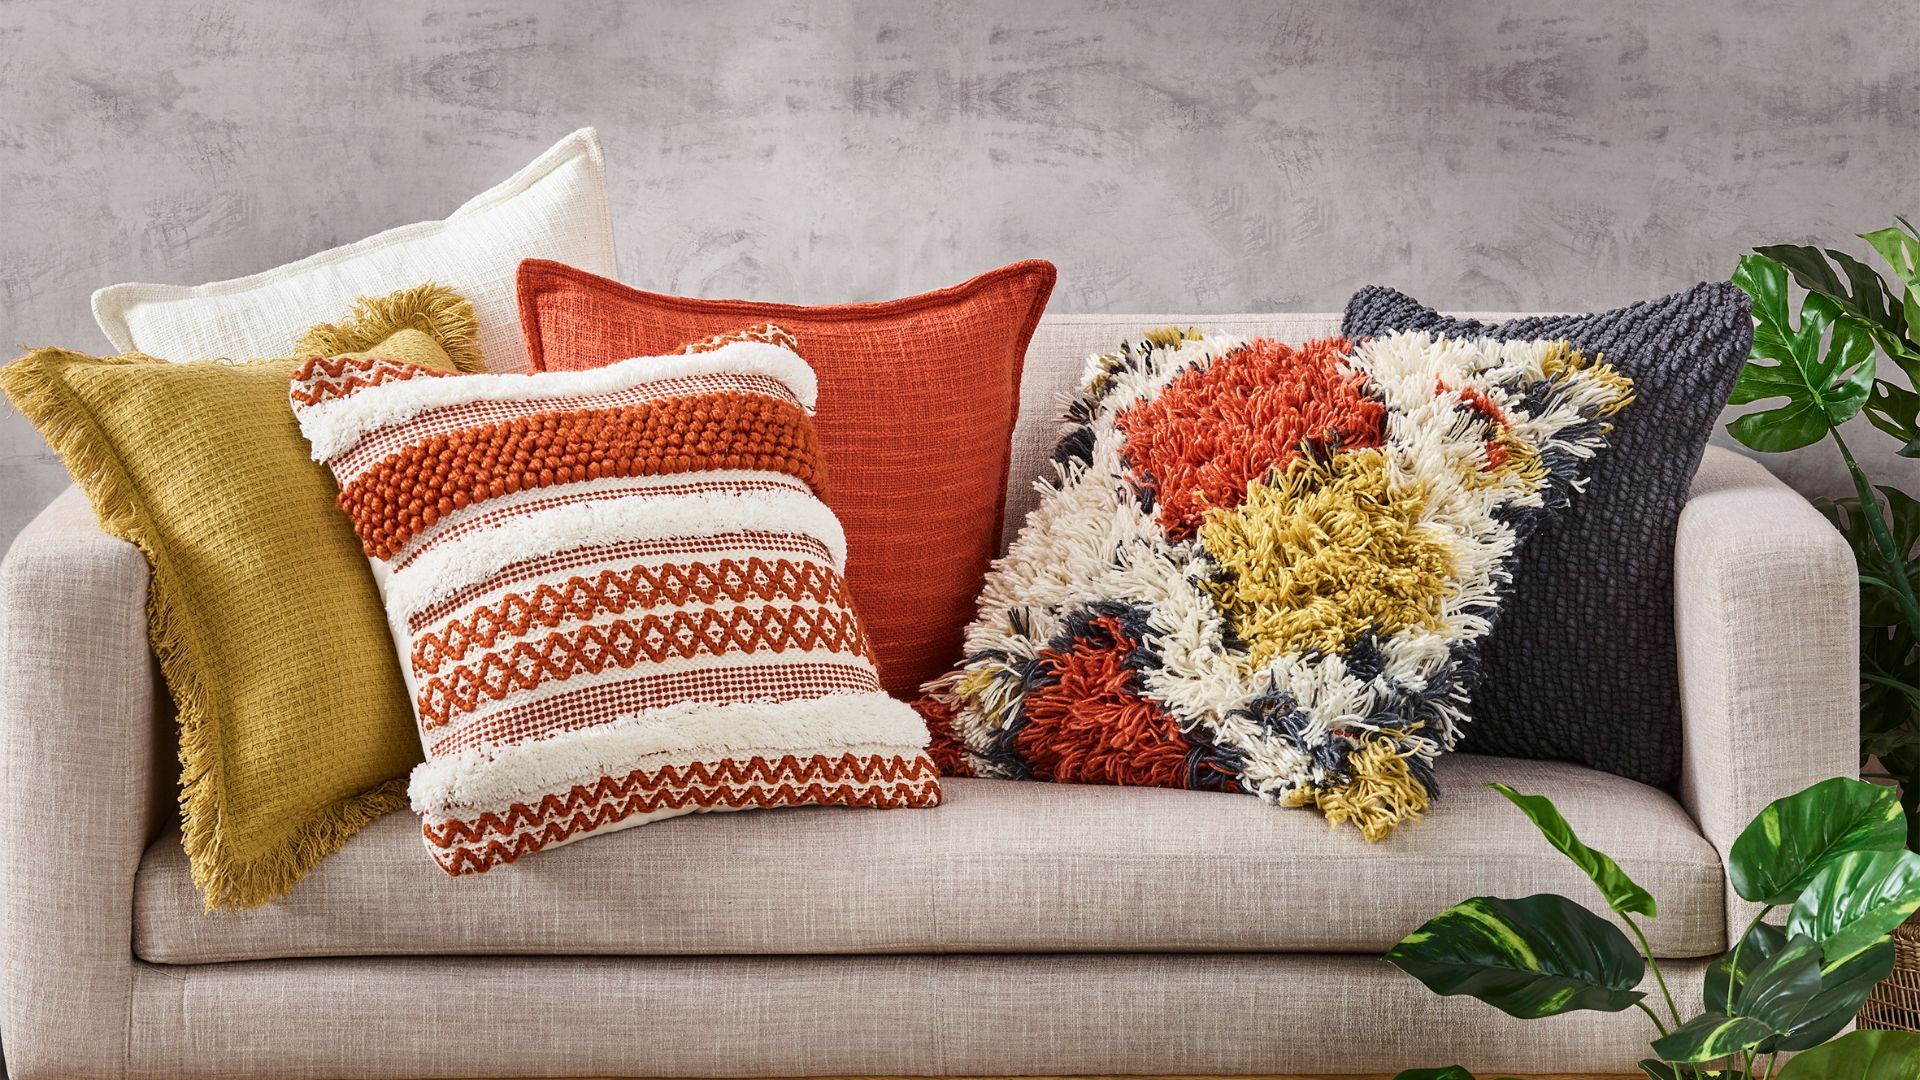 Tufted textured cushions paired with fringe cushions